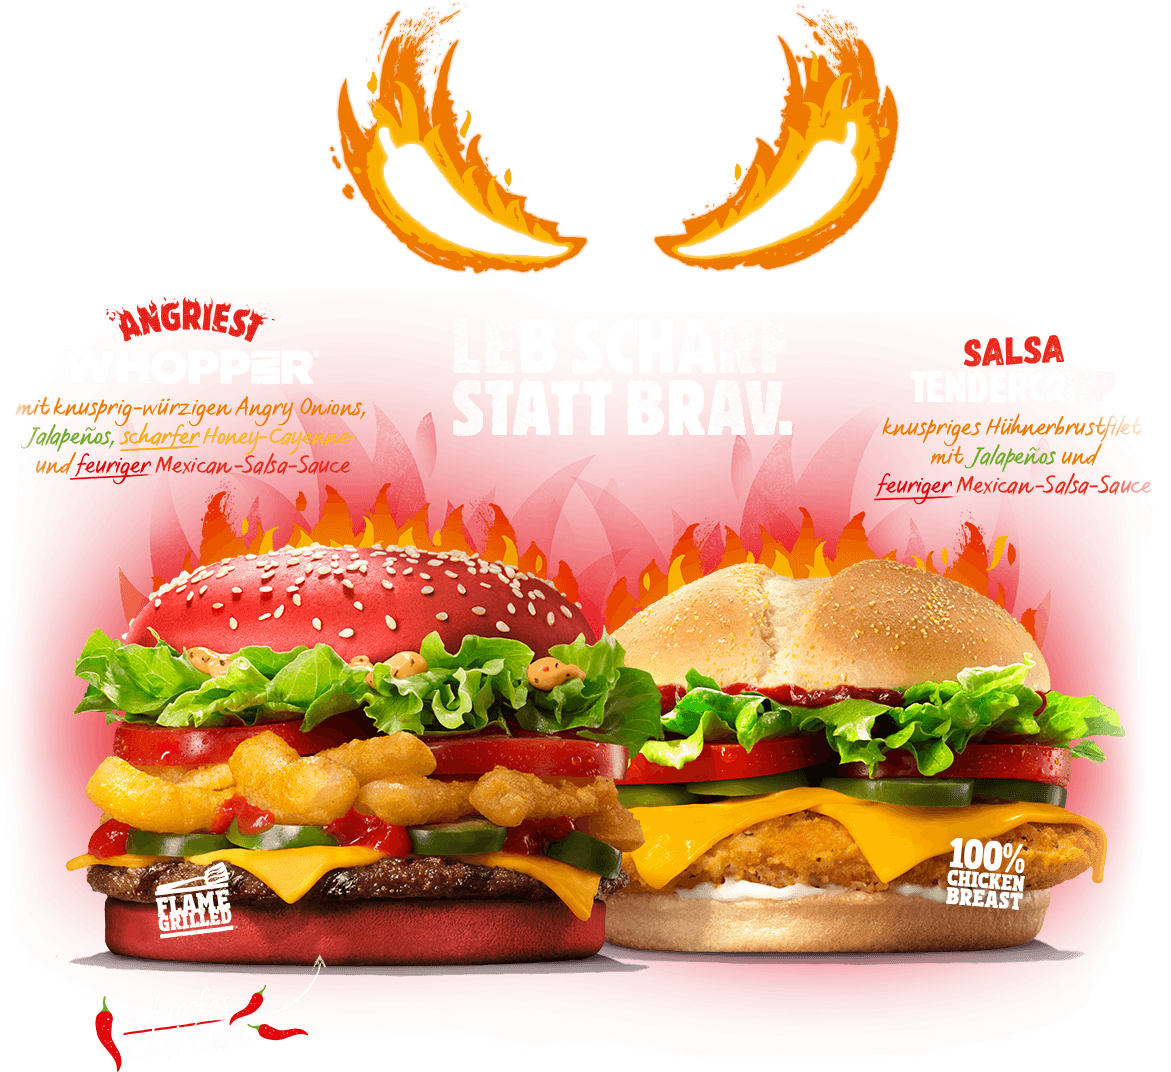 Burger King Angriest Whopper